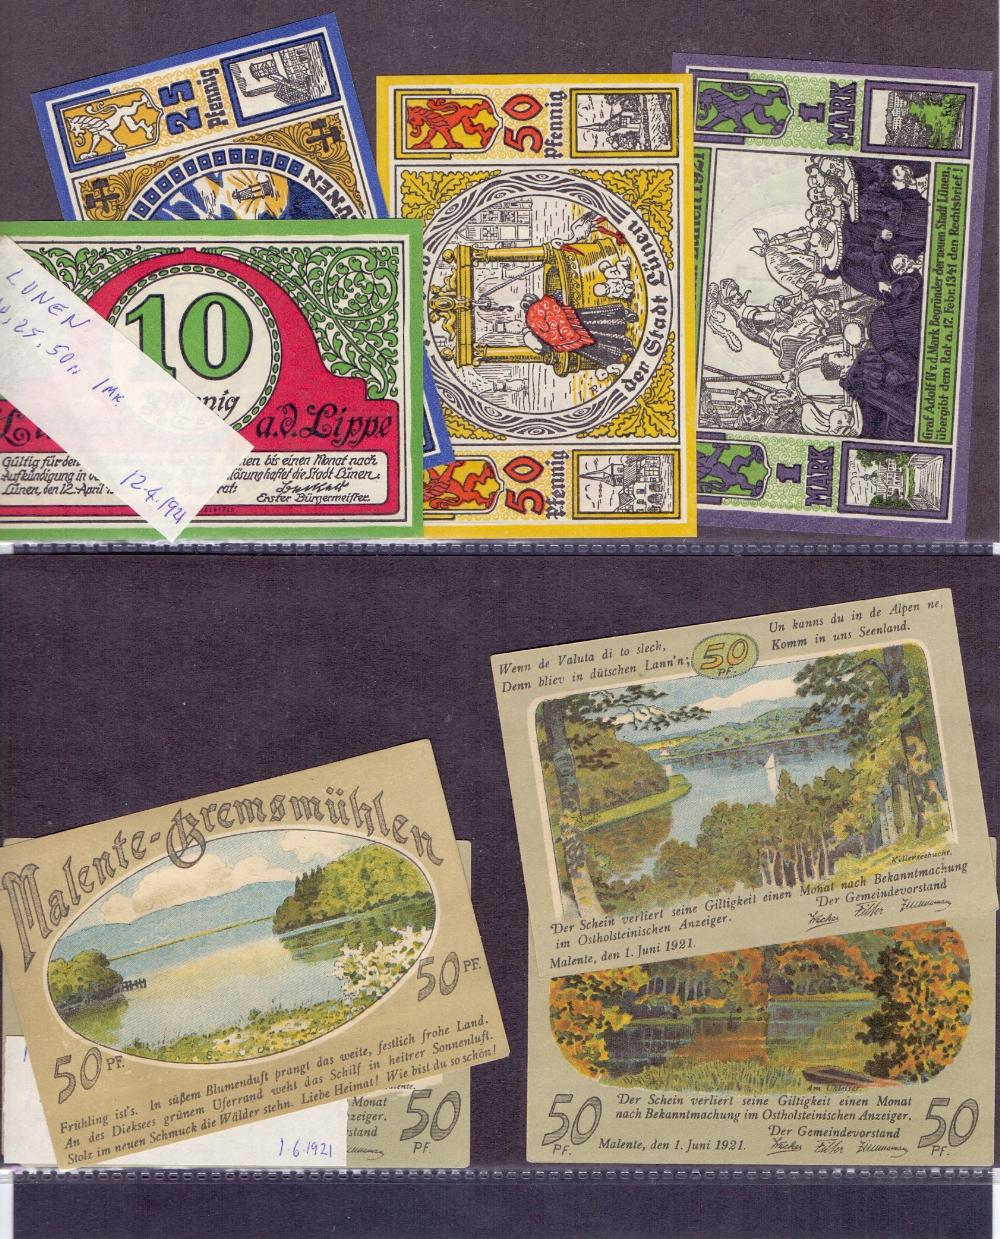 Germany, collection of 'NOTGELD' in album with 139 different German notes from early 1920s. - Image 2 of 3